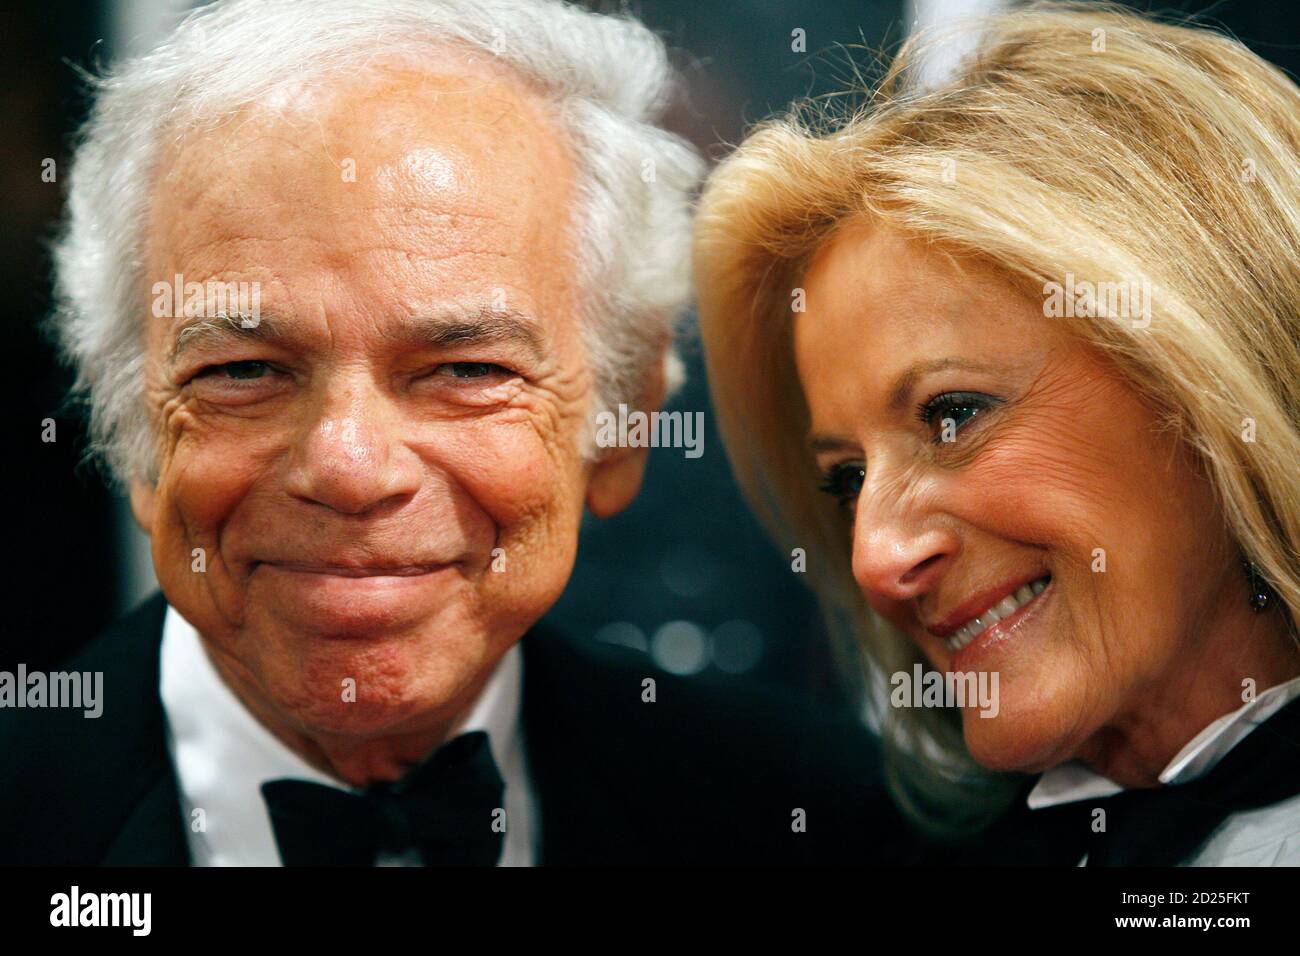 Designer Ralph Lauren arrives with his wife Ricky Low-Beer for a screening  of the film "Invictus" and for a salute to the work of Clint Eastwood by  the Museum of The Moving